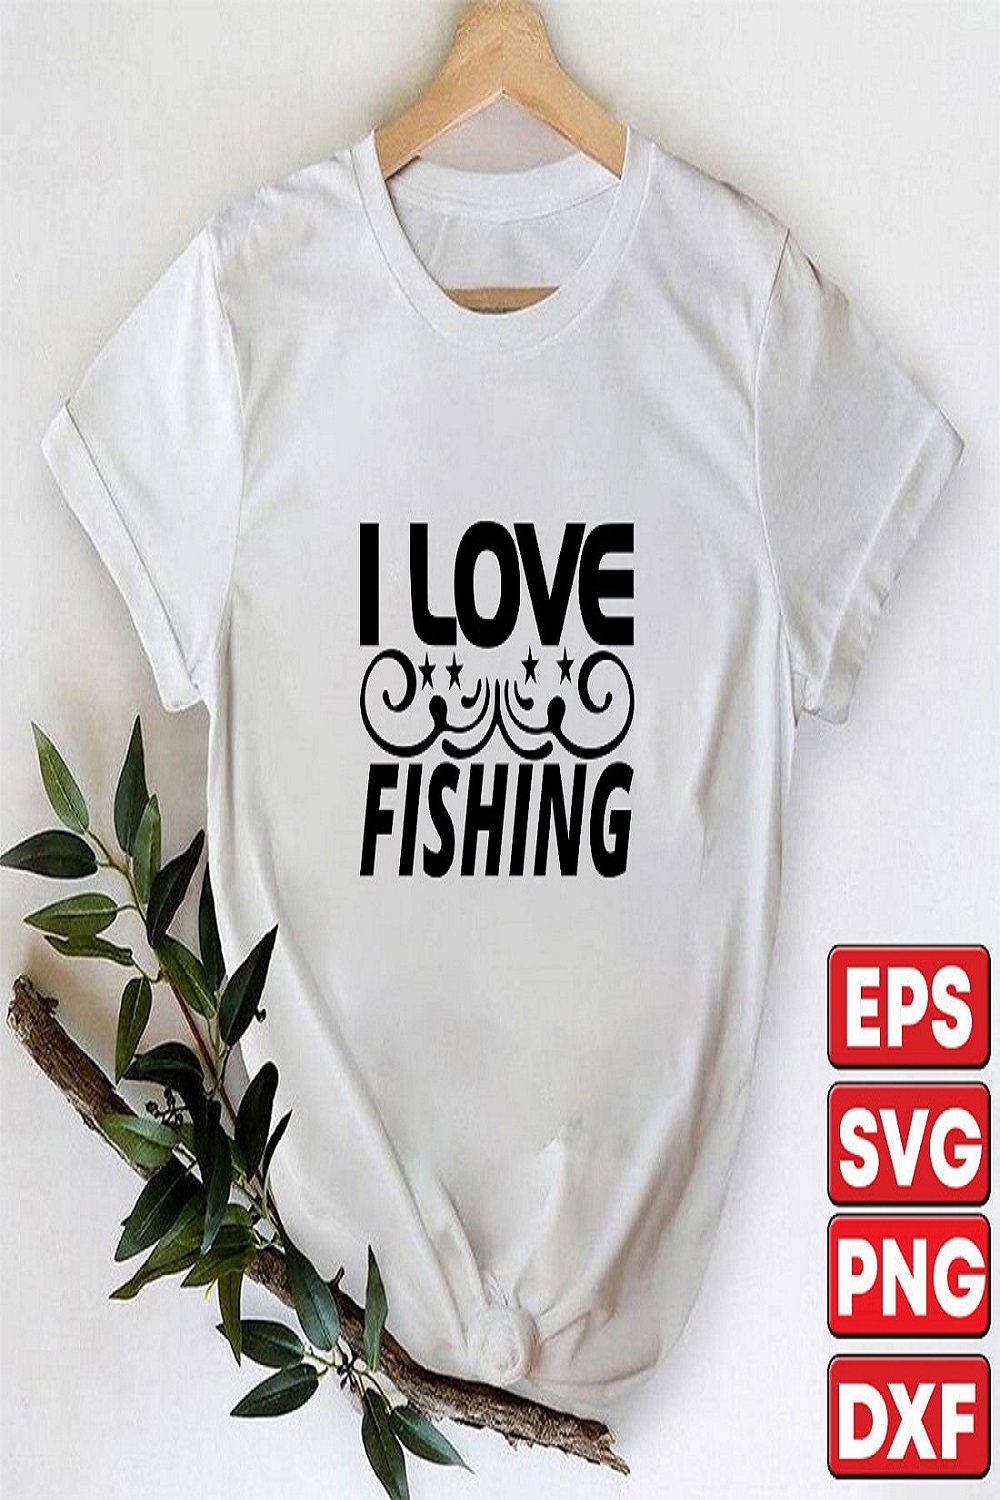 I Love fishing pinterest preview image.